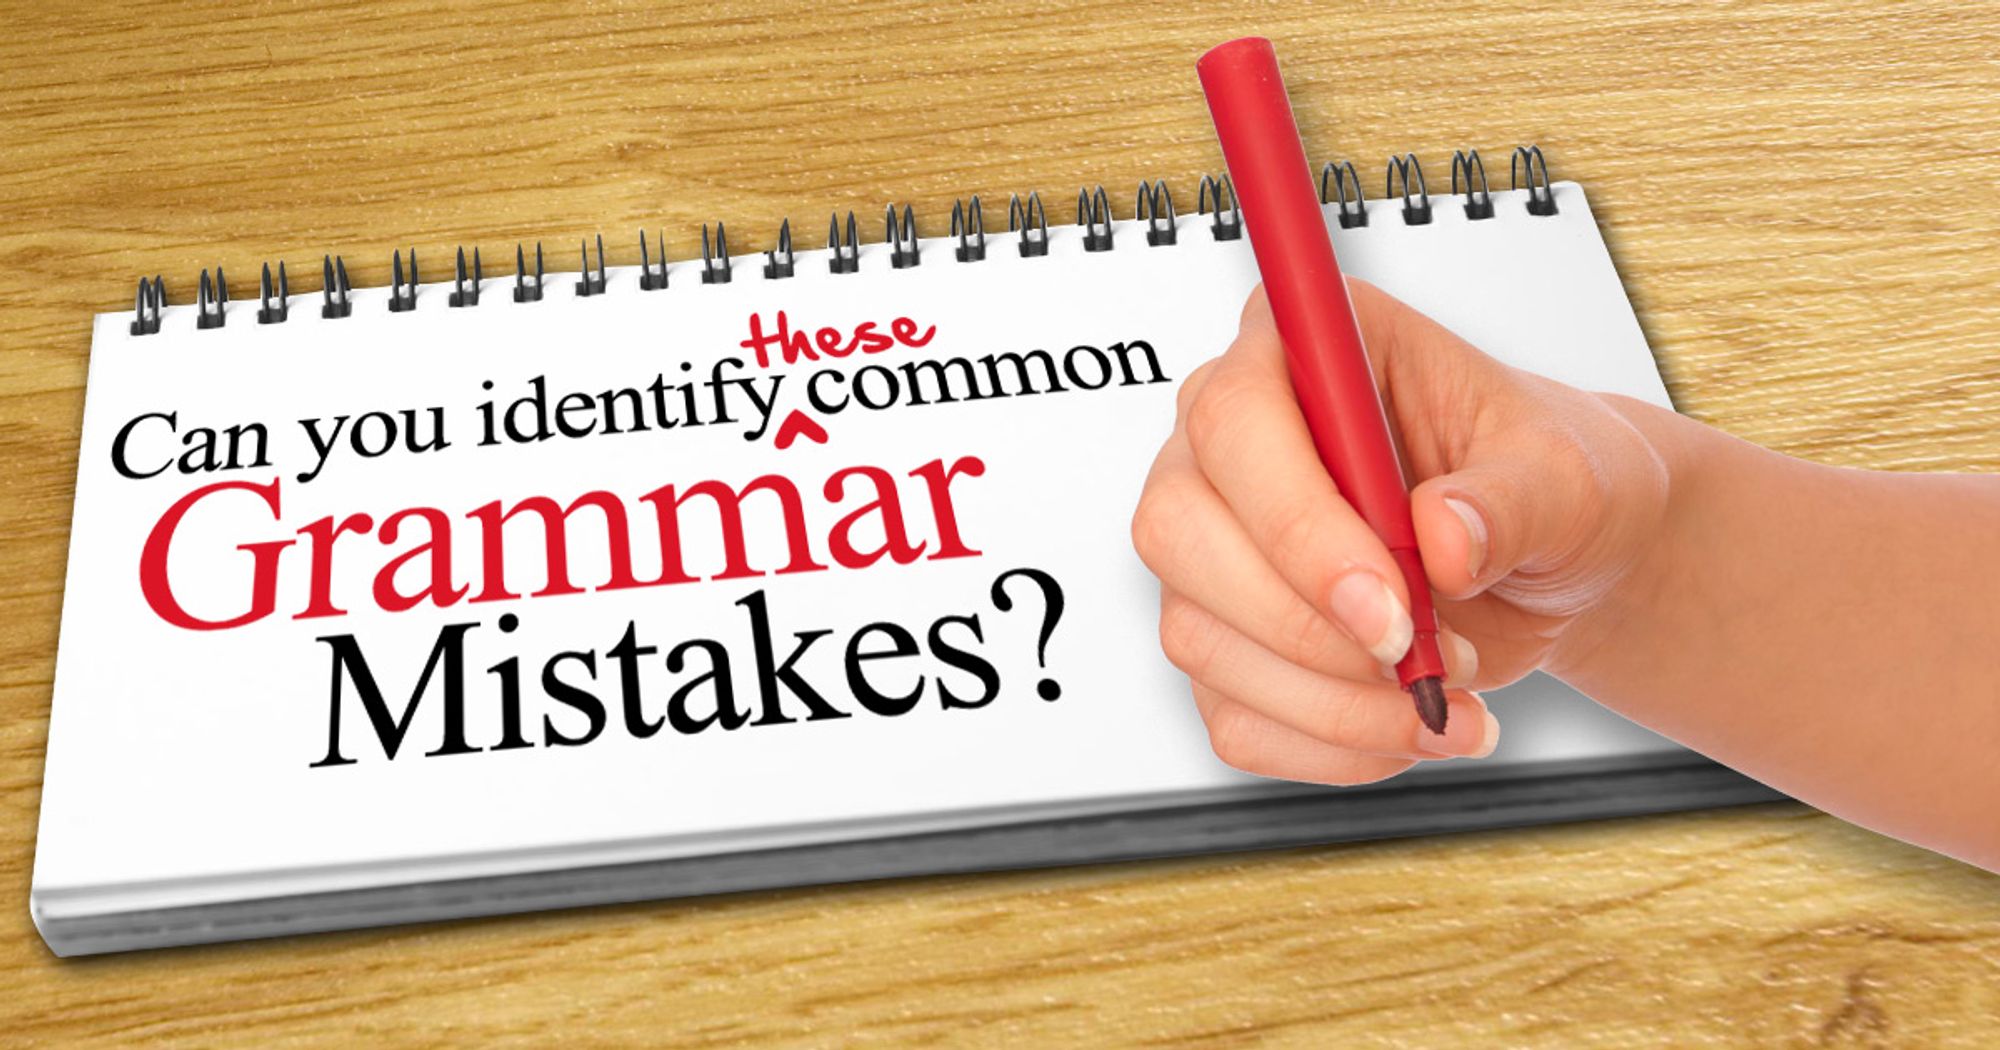 How to correct your grammars with free tools better than Grammarly does.